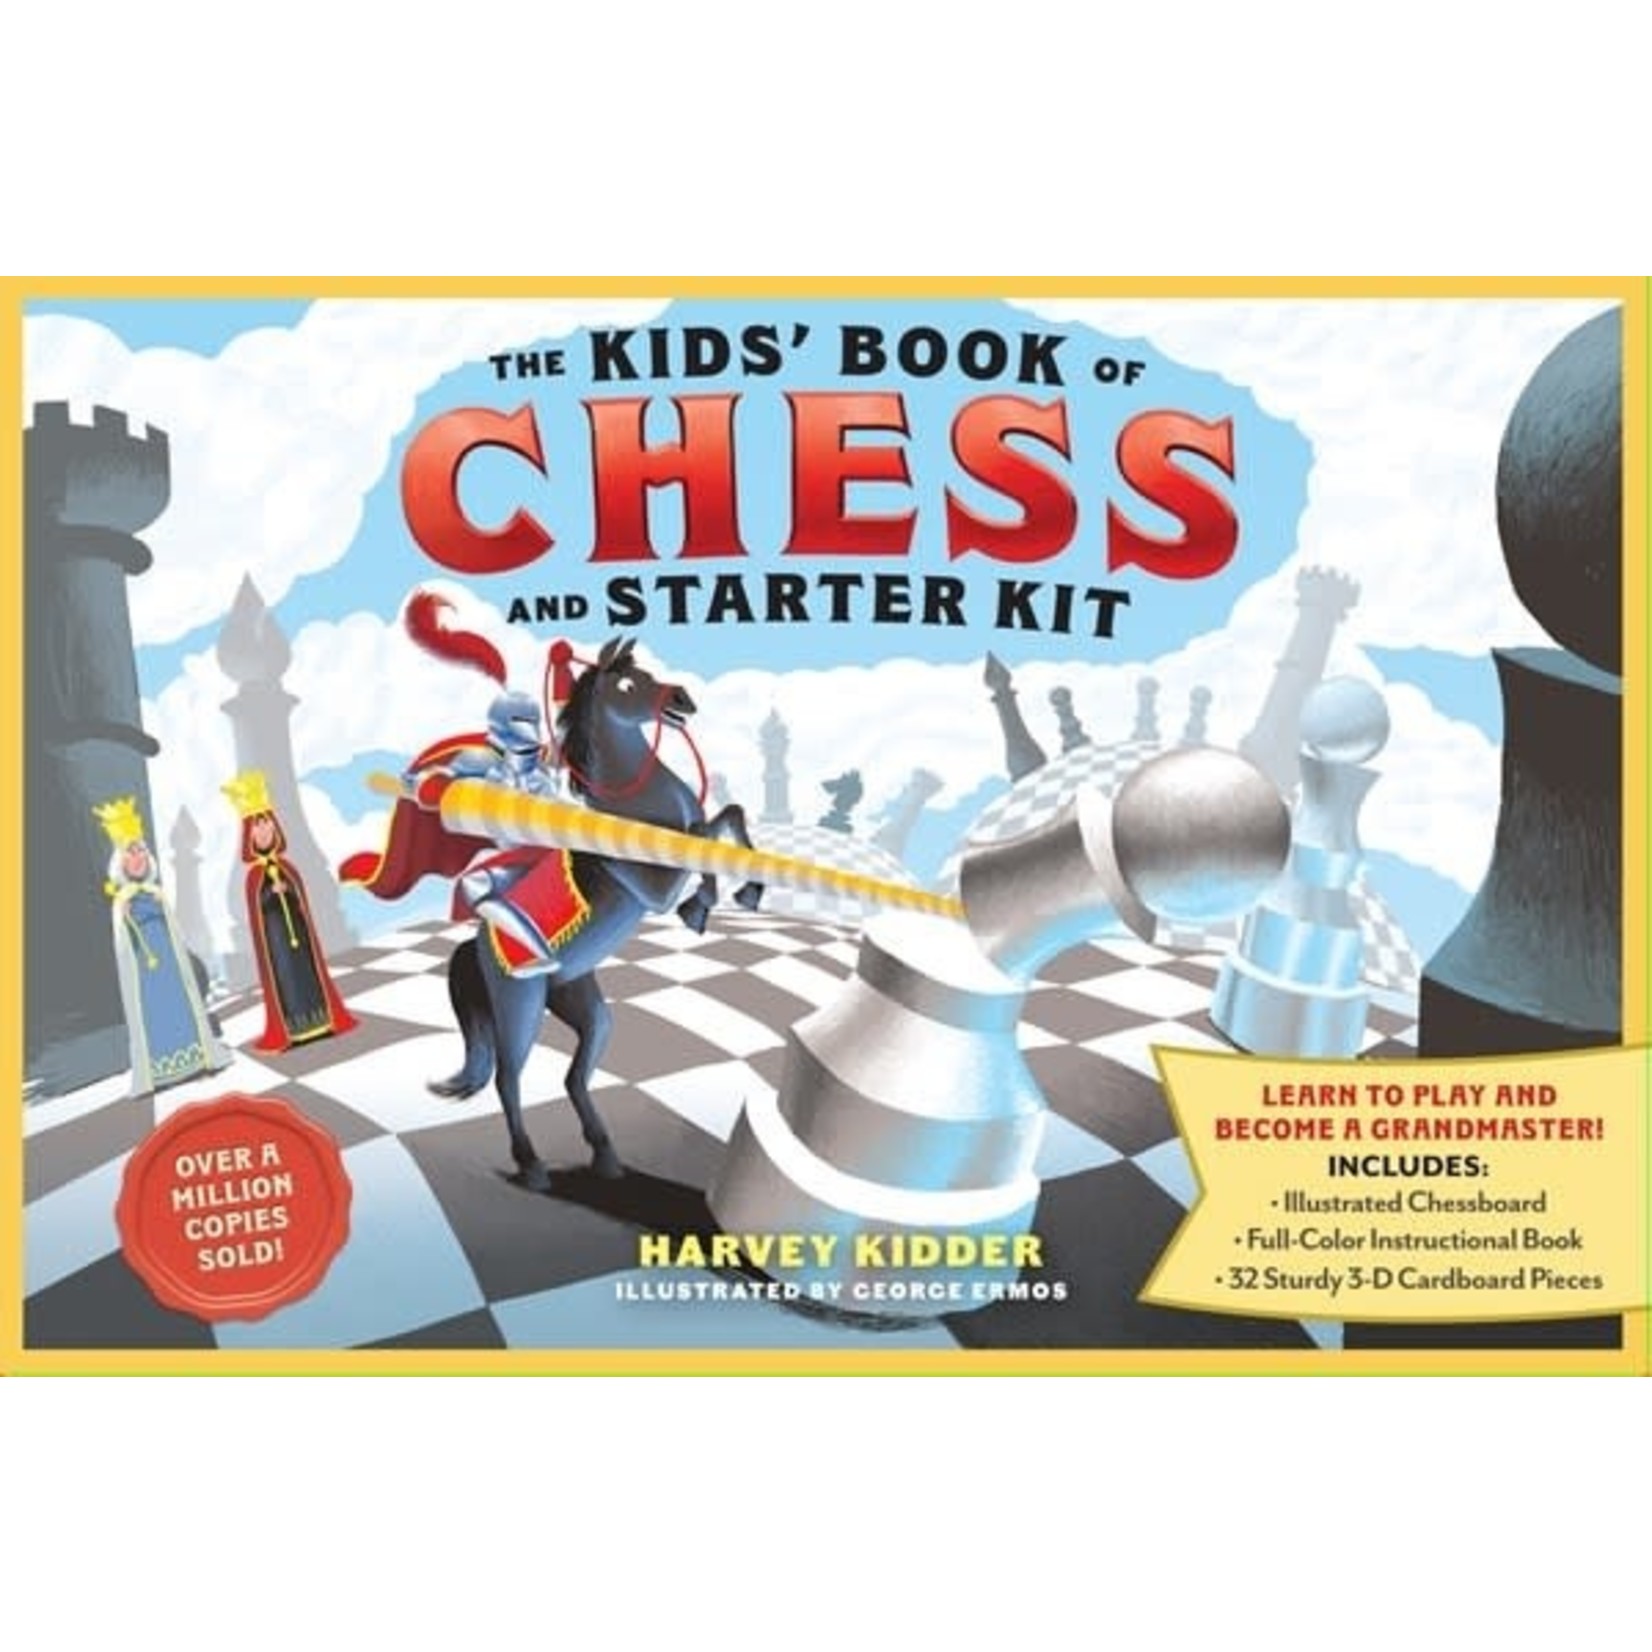 The Kid's Book of Chess and Chess Set